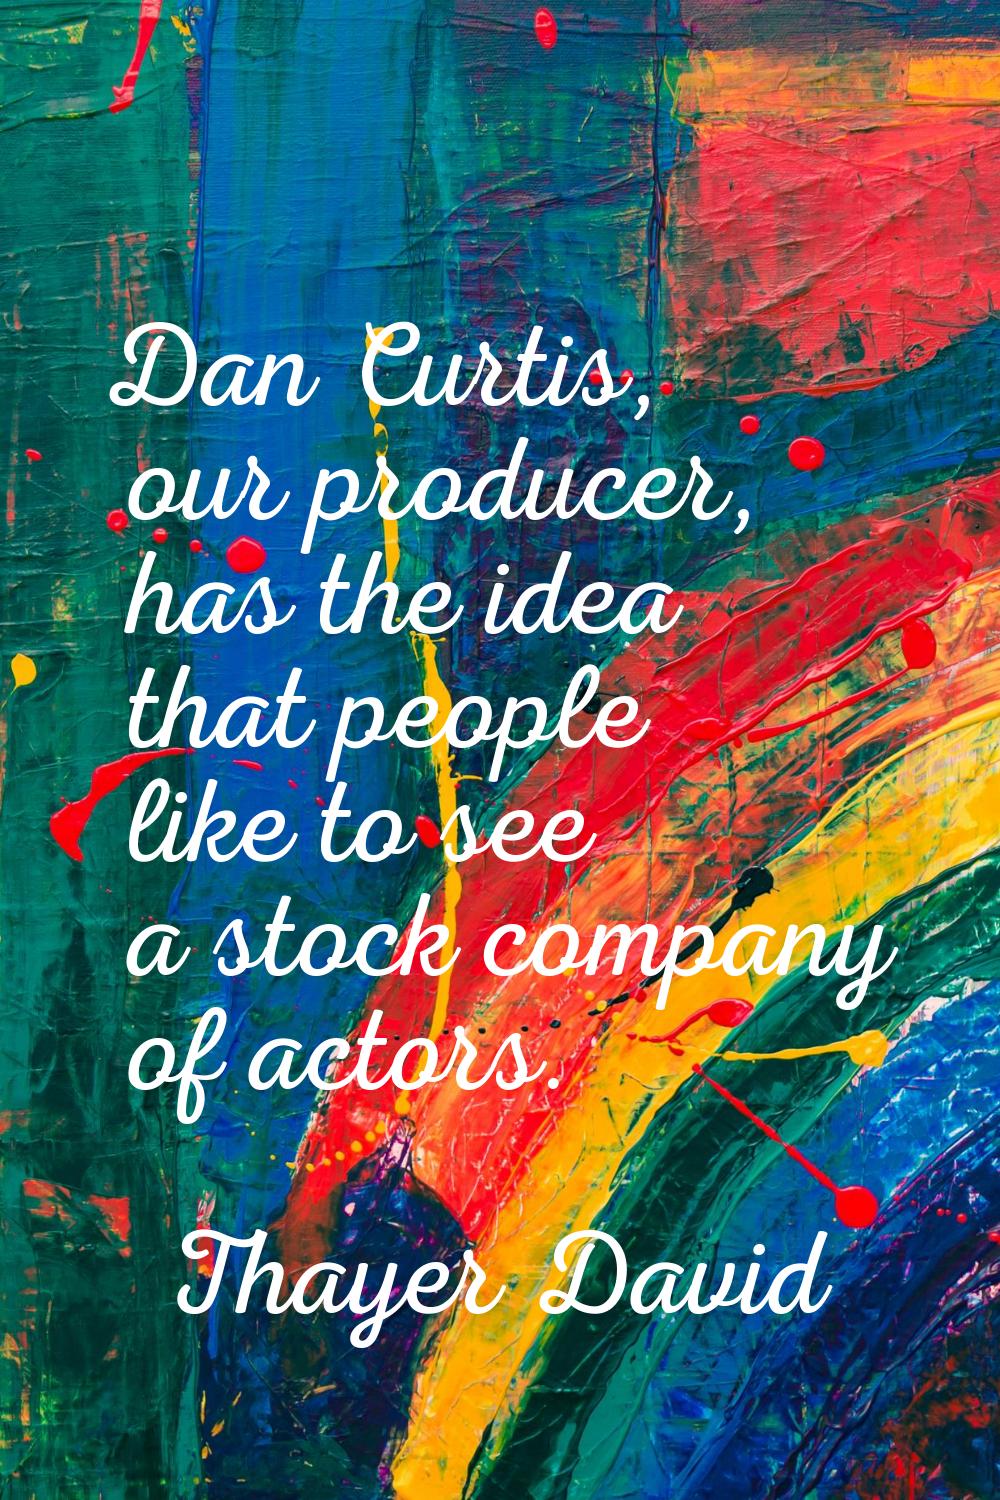 Dan Curtis, our producer, has the idea that people like to see a stock company of actors.